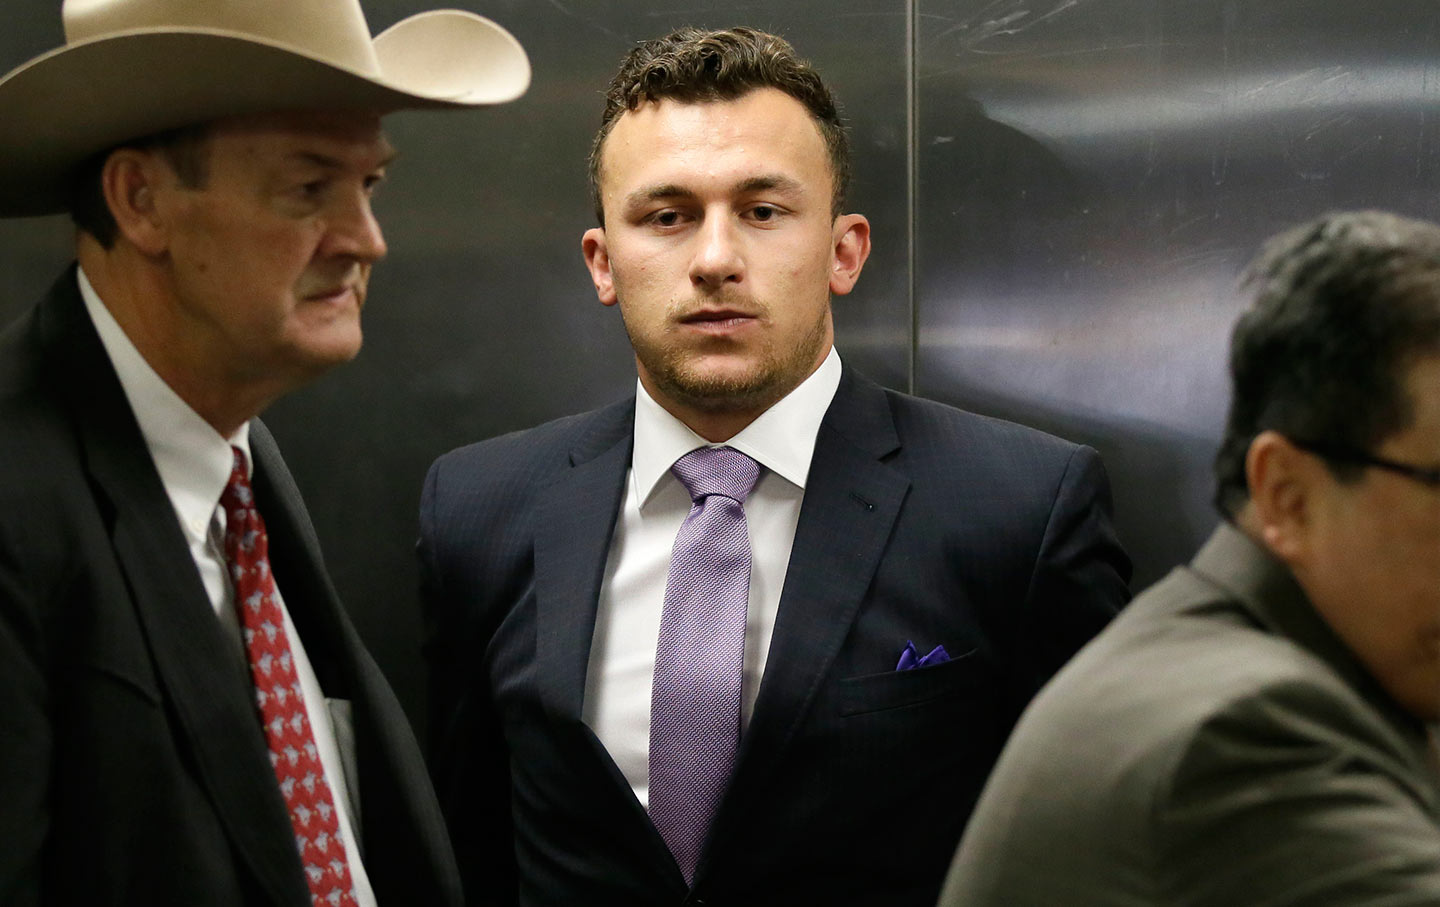 Former NFL quarterback Johnny Manziel takes an elevator with his lawyer Jim Darnell in Dallas on Tuesday, February 28, 2017.